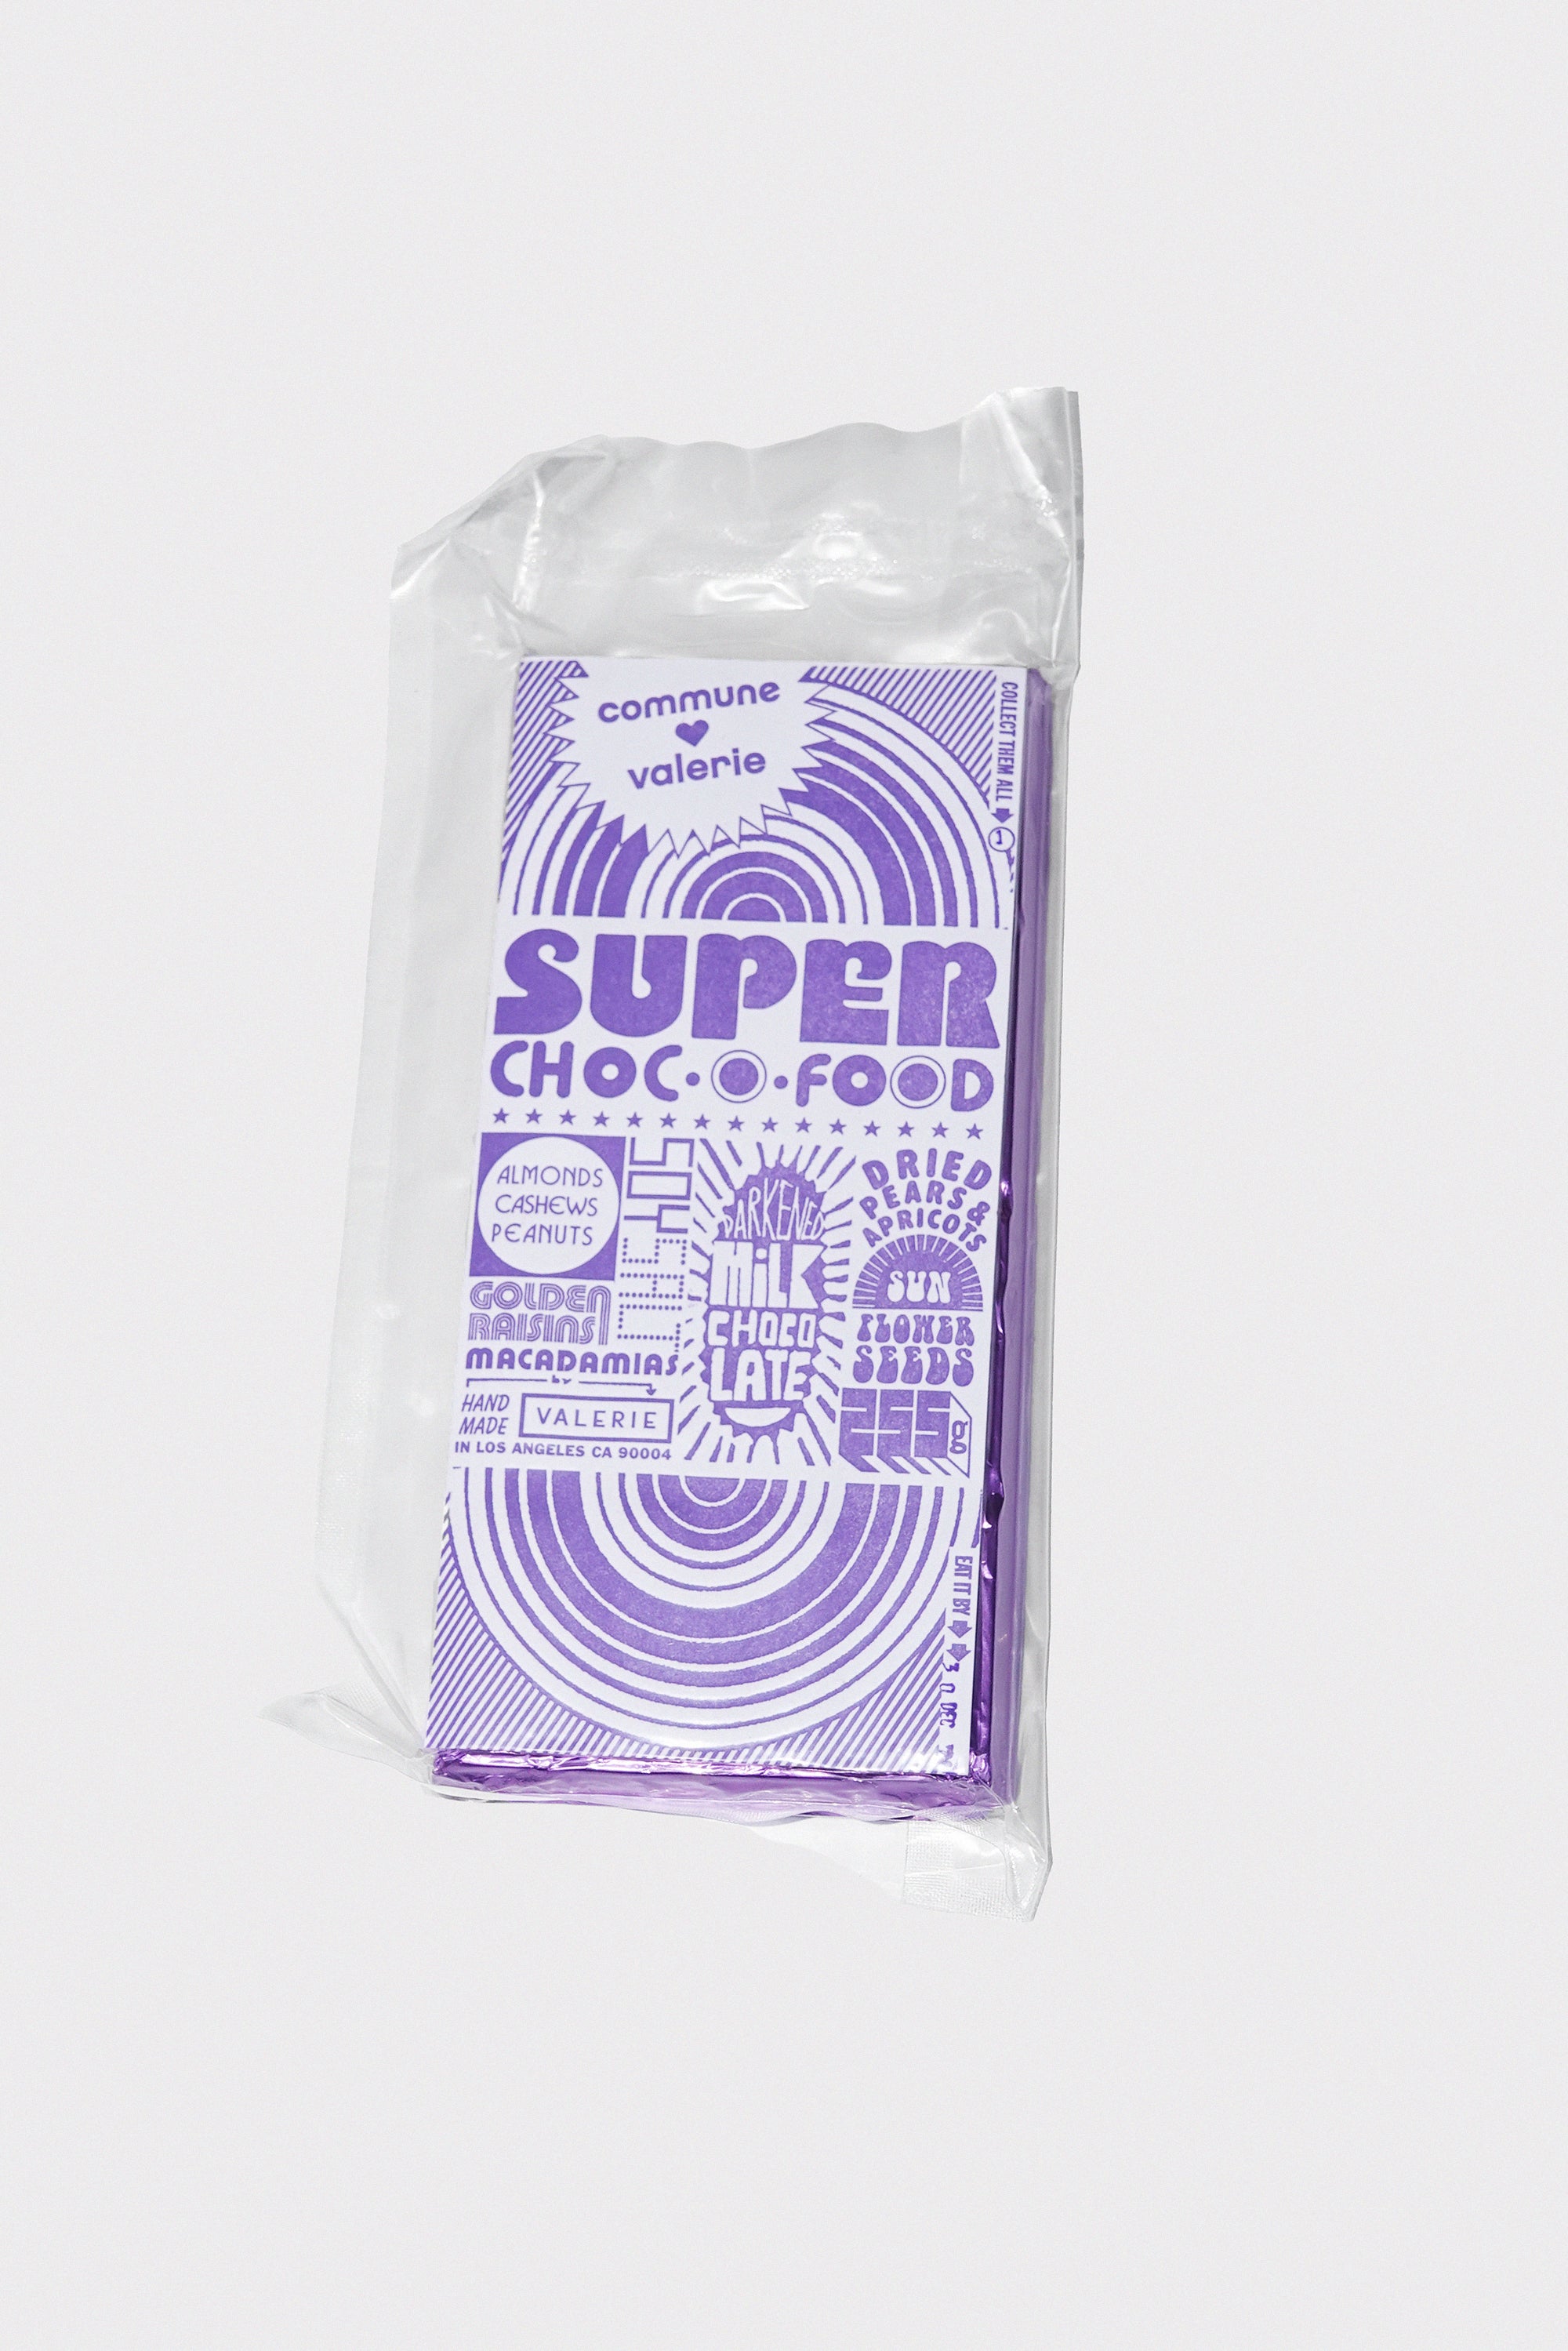 Super Choc-O-Food Bar by Commune x Valerie Confections